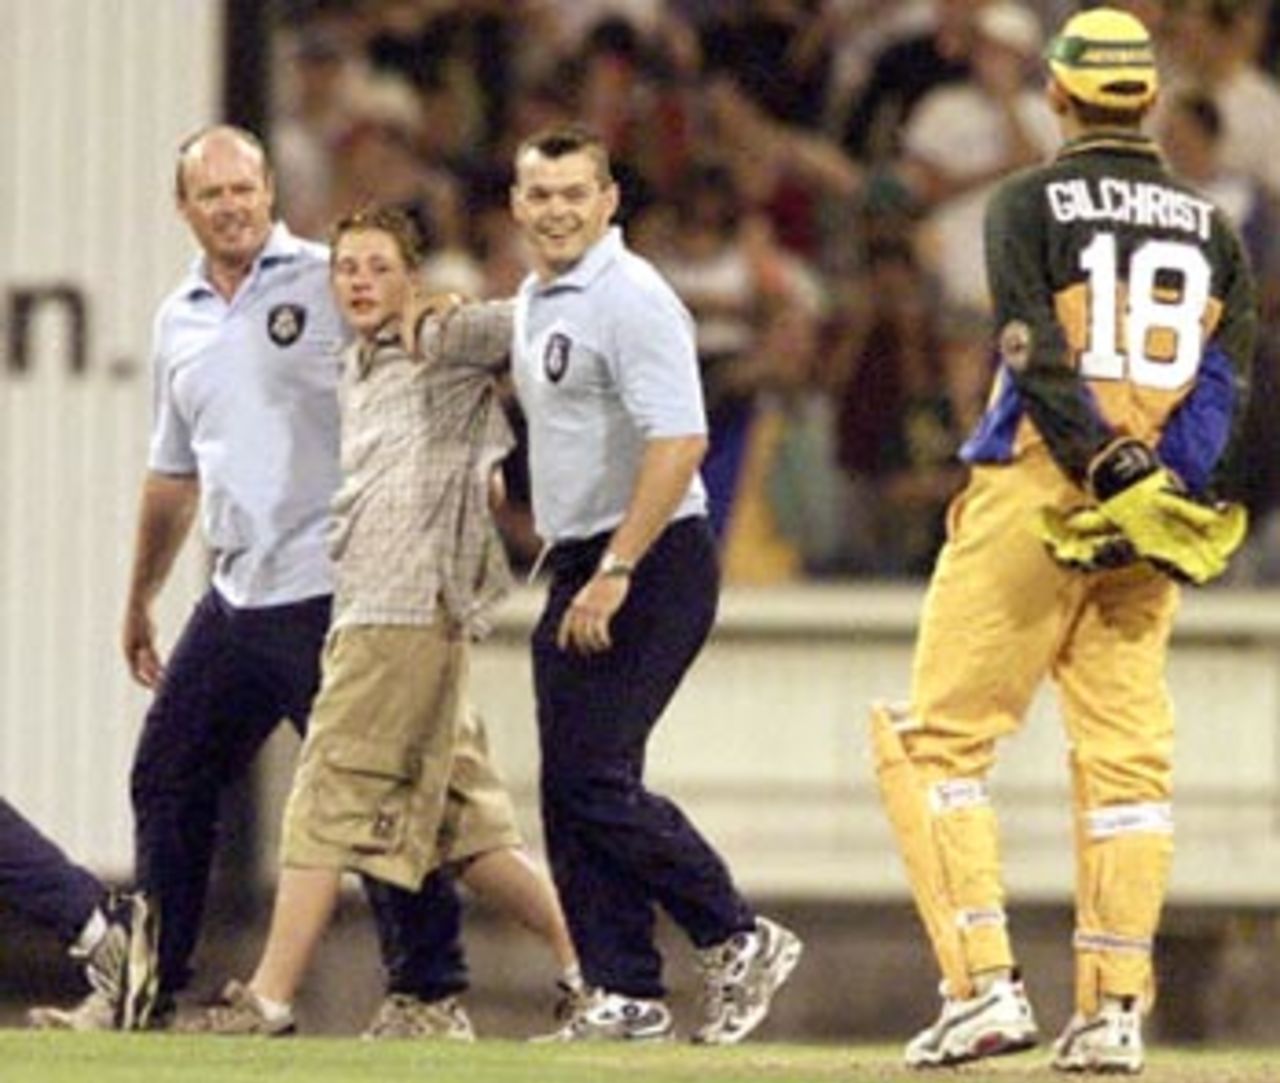 Policemen arresting a ground invader chat to Australian wicketkeeper Adam Gilchrist (R) in their match against the West Indies at the MCG in Melbourne, 11 January 2000. Australia scored 267-6 off their 50 overs and then restricted the West Indies to 193-7 from their 50 overs to go one up in the tri-nations series which also includes Zimbabwe.